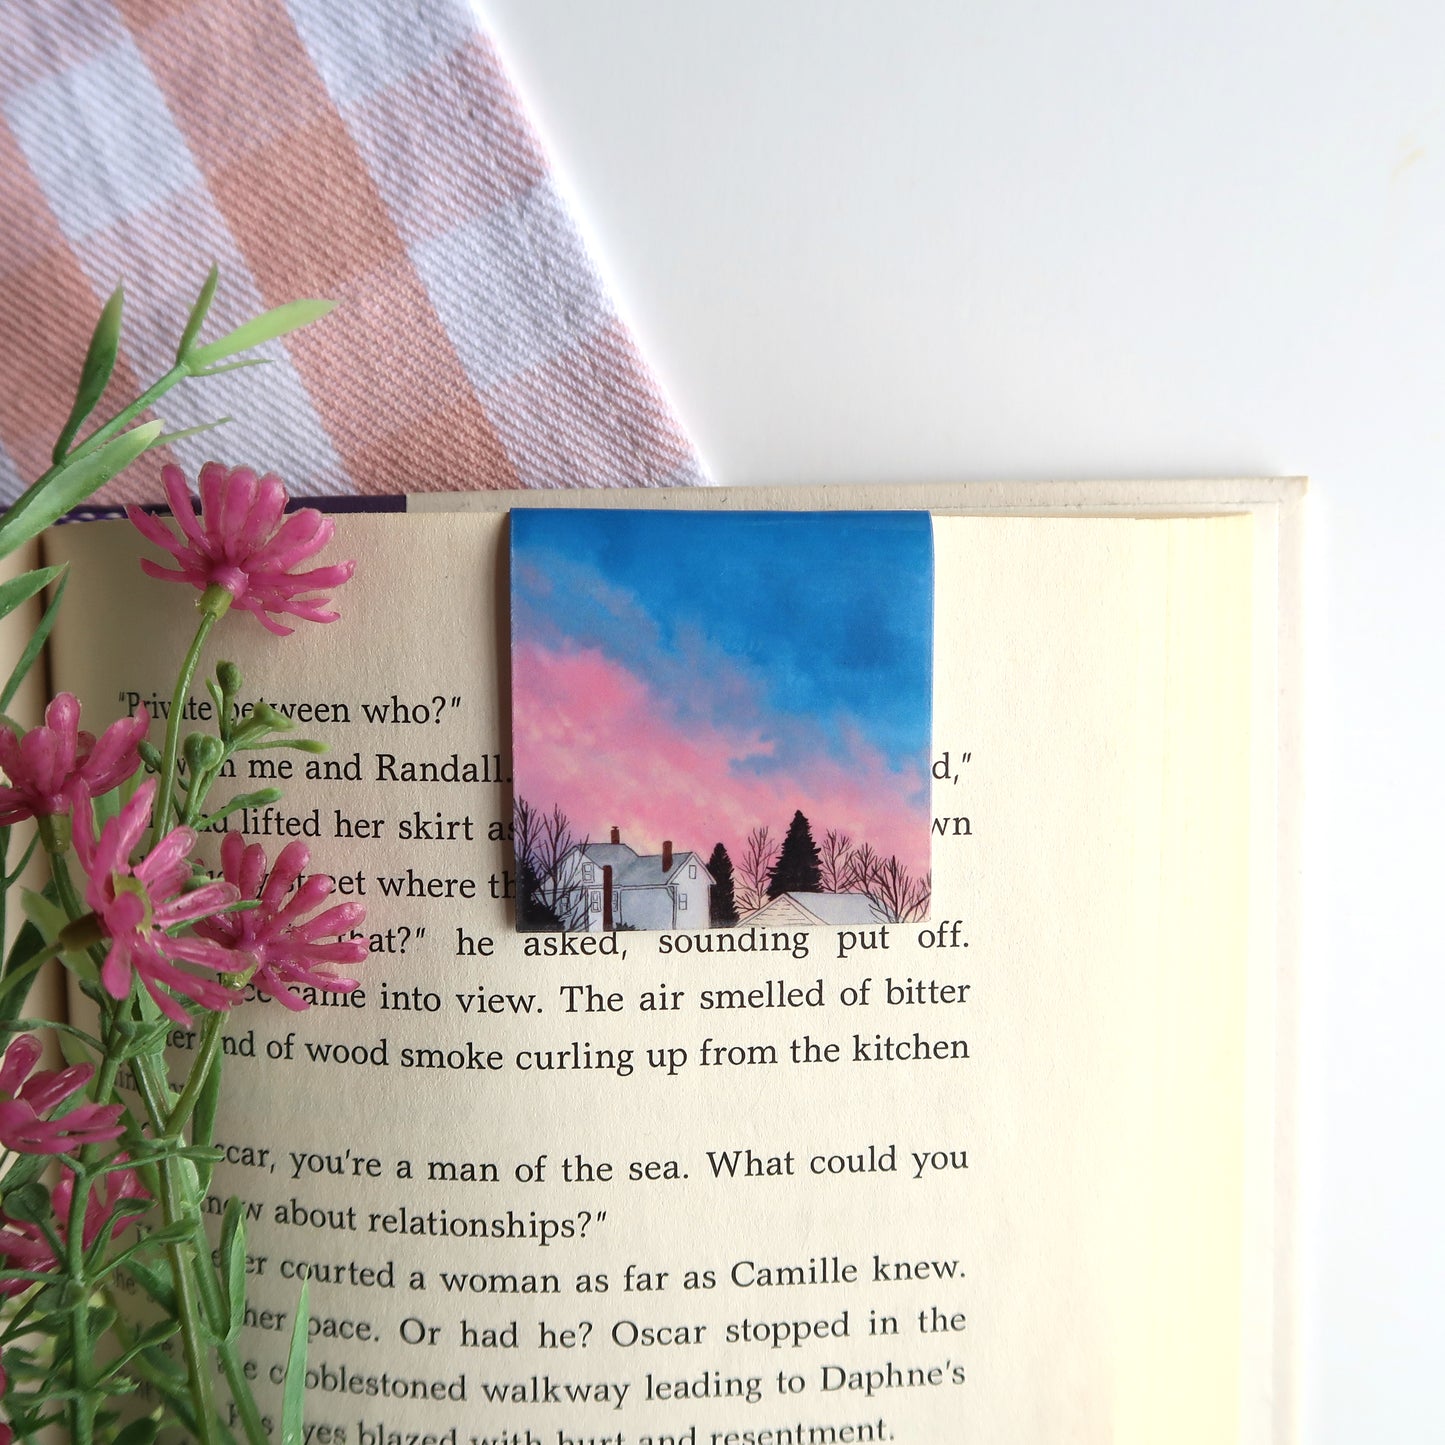 Bright Pink and Blue Sunset - Magnetic Bookmark